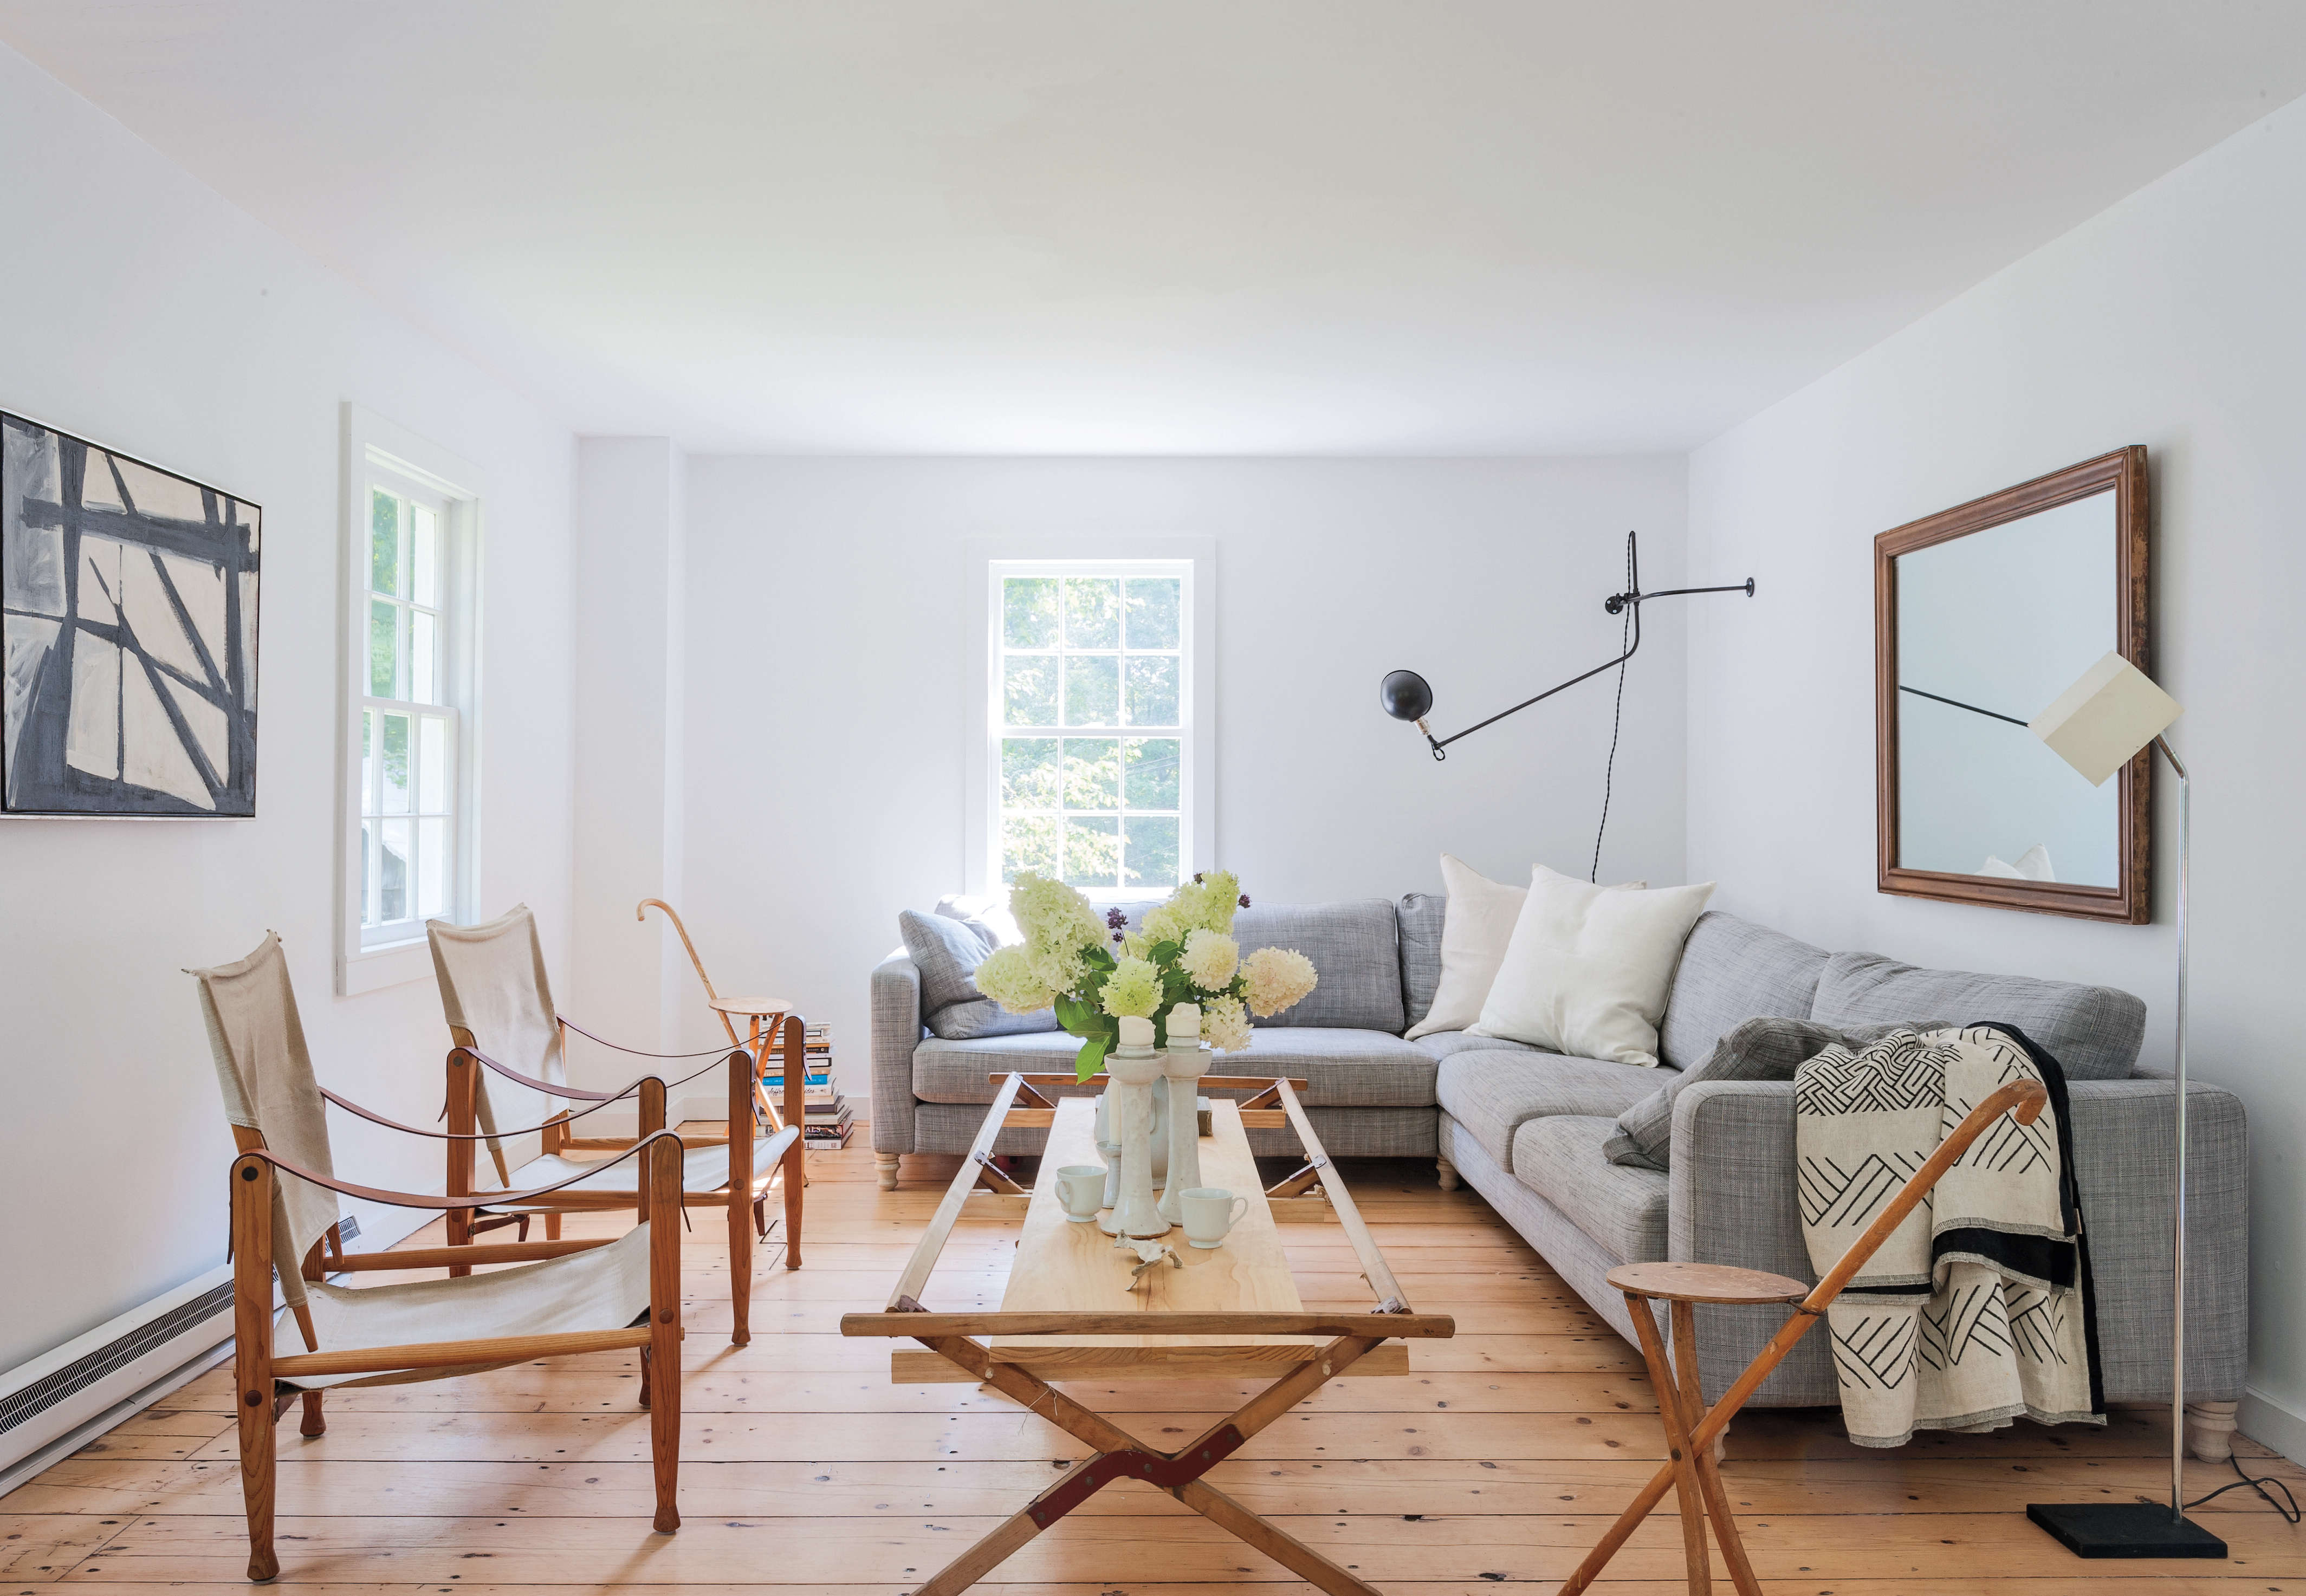 expert advice: 11 tips for making a room look bigger 12